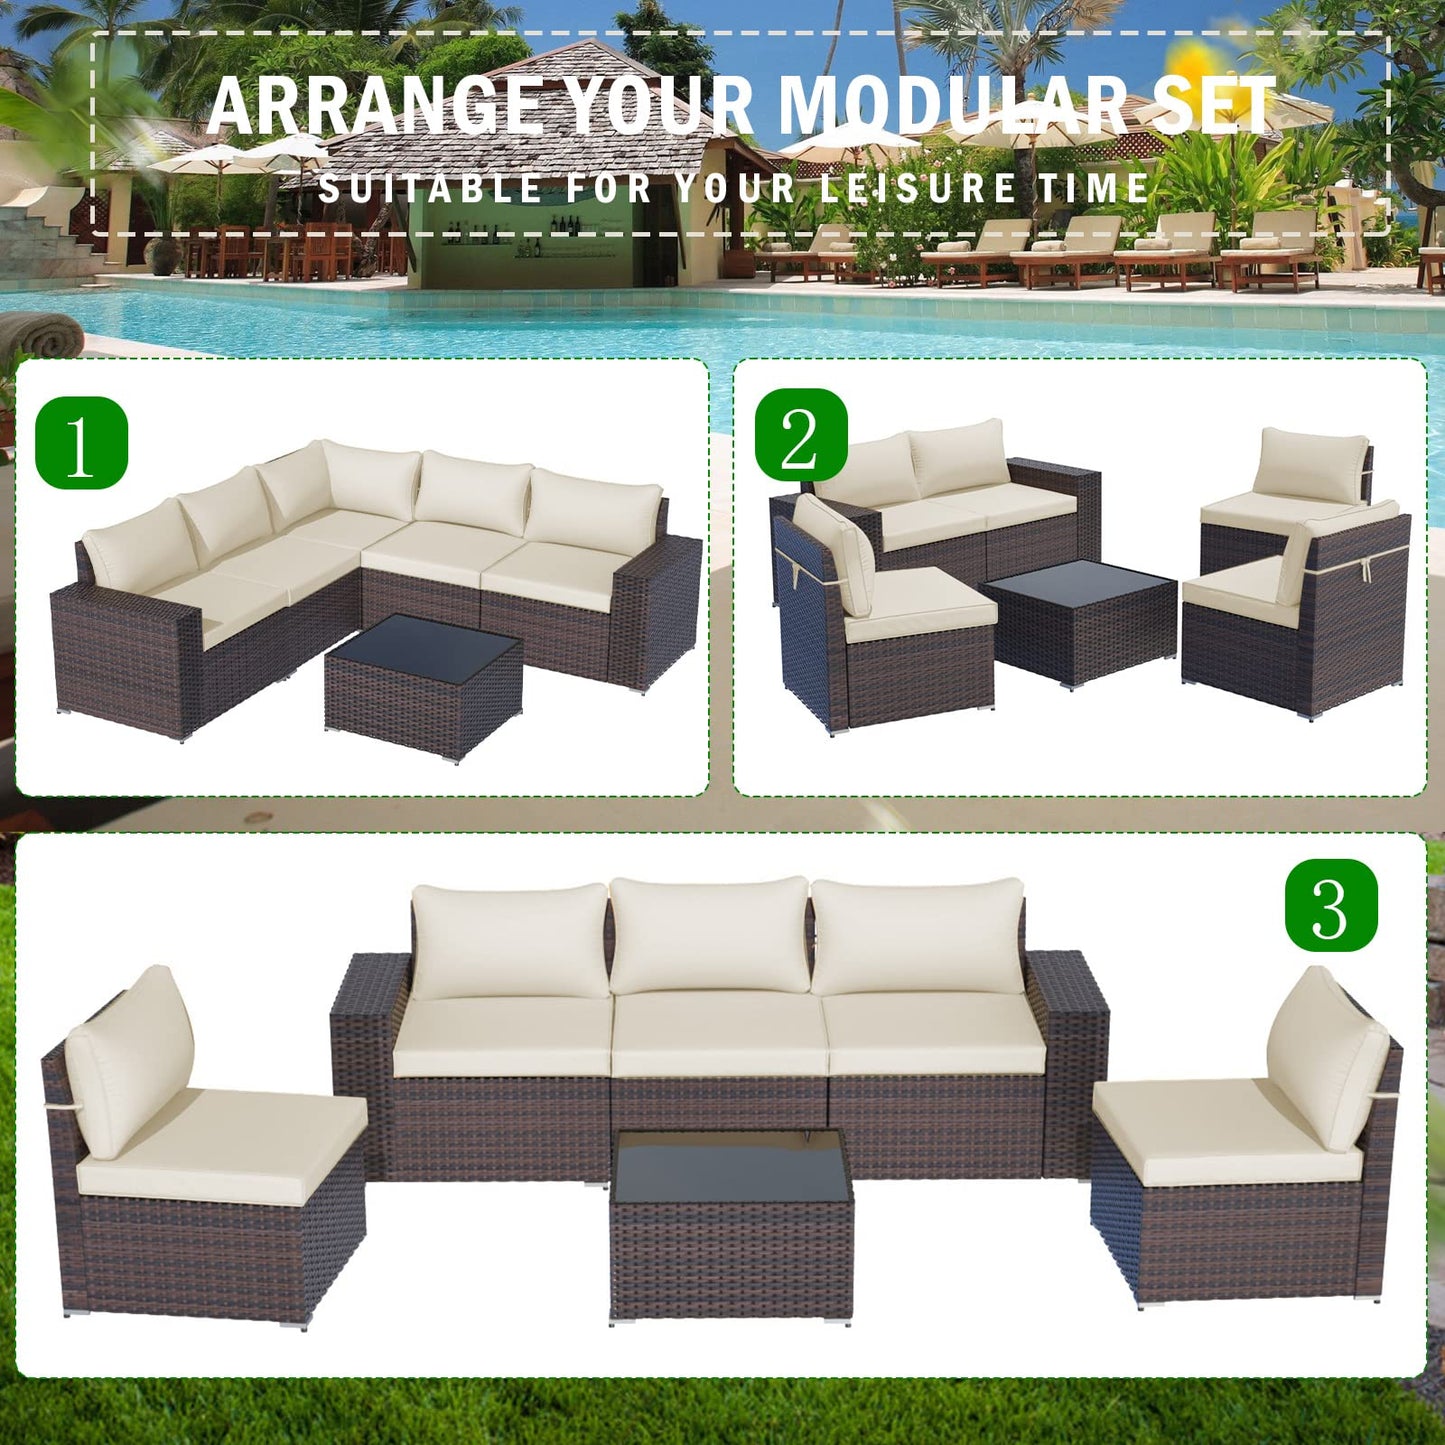 ALAULM Patio Furniture Sets 6 Pieces Patio Sectional Outdoor Furniture Patio Sofa Chairs Set - Cream